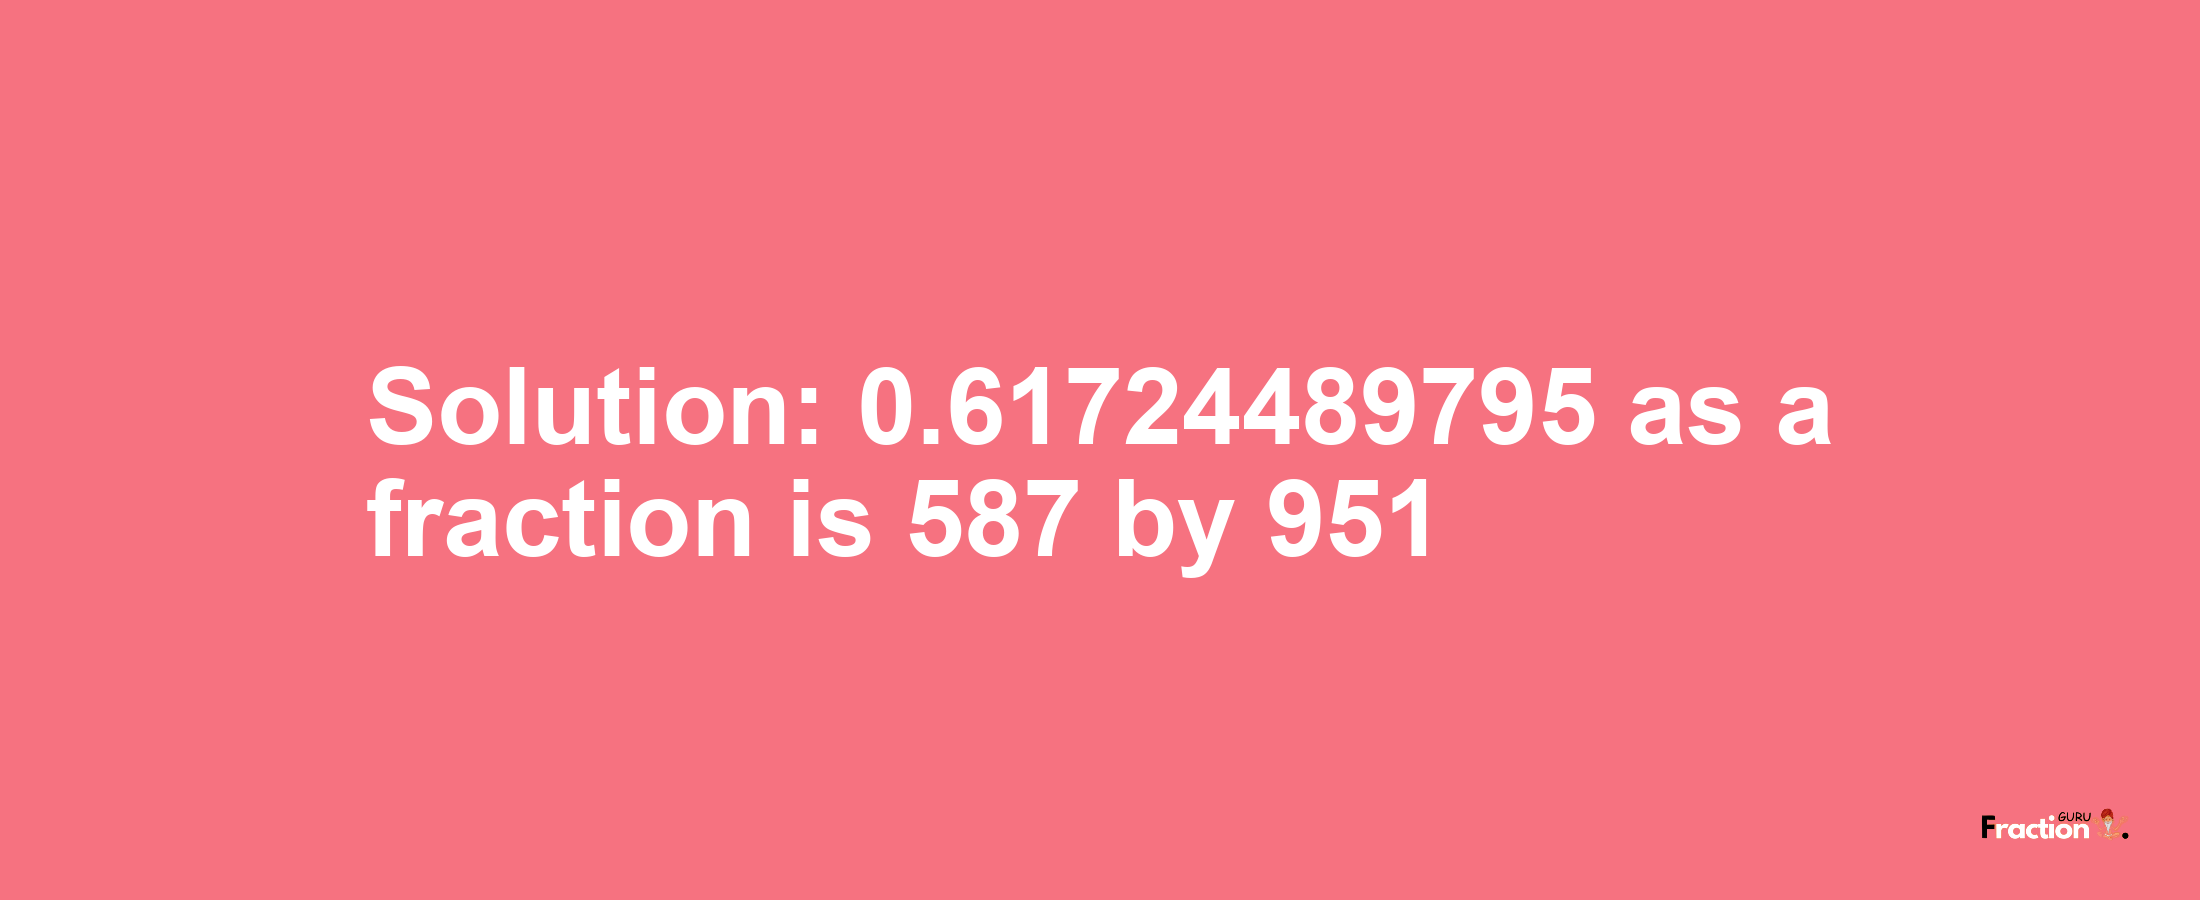 Solution:0.61724489795 as a fraction is 587/951